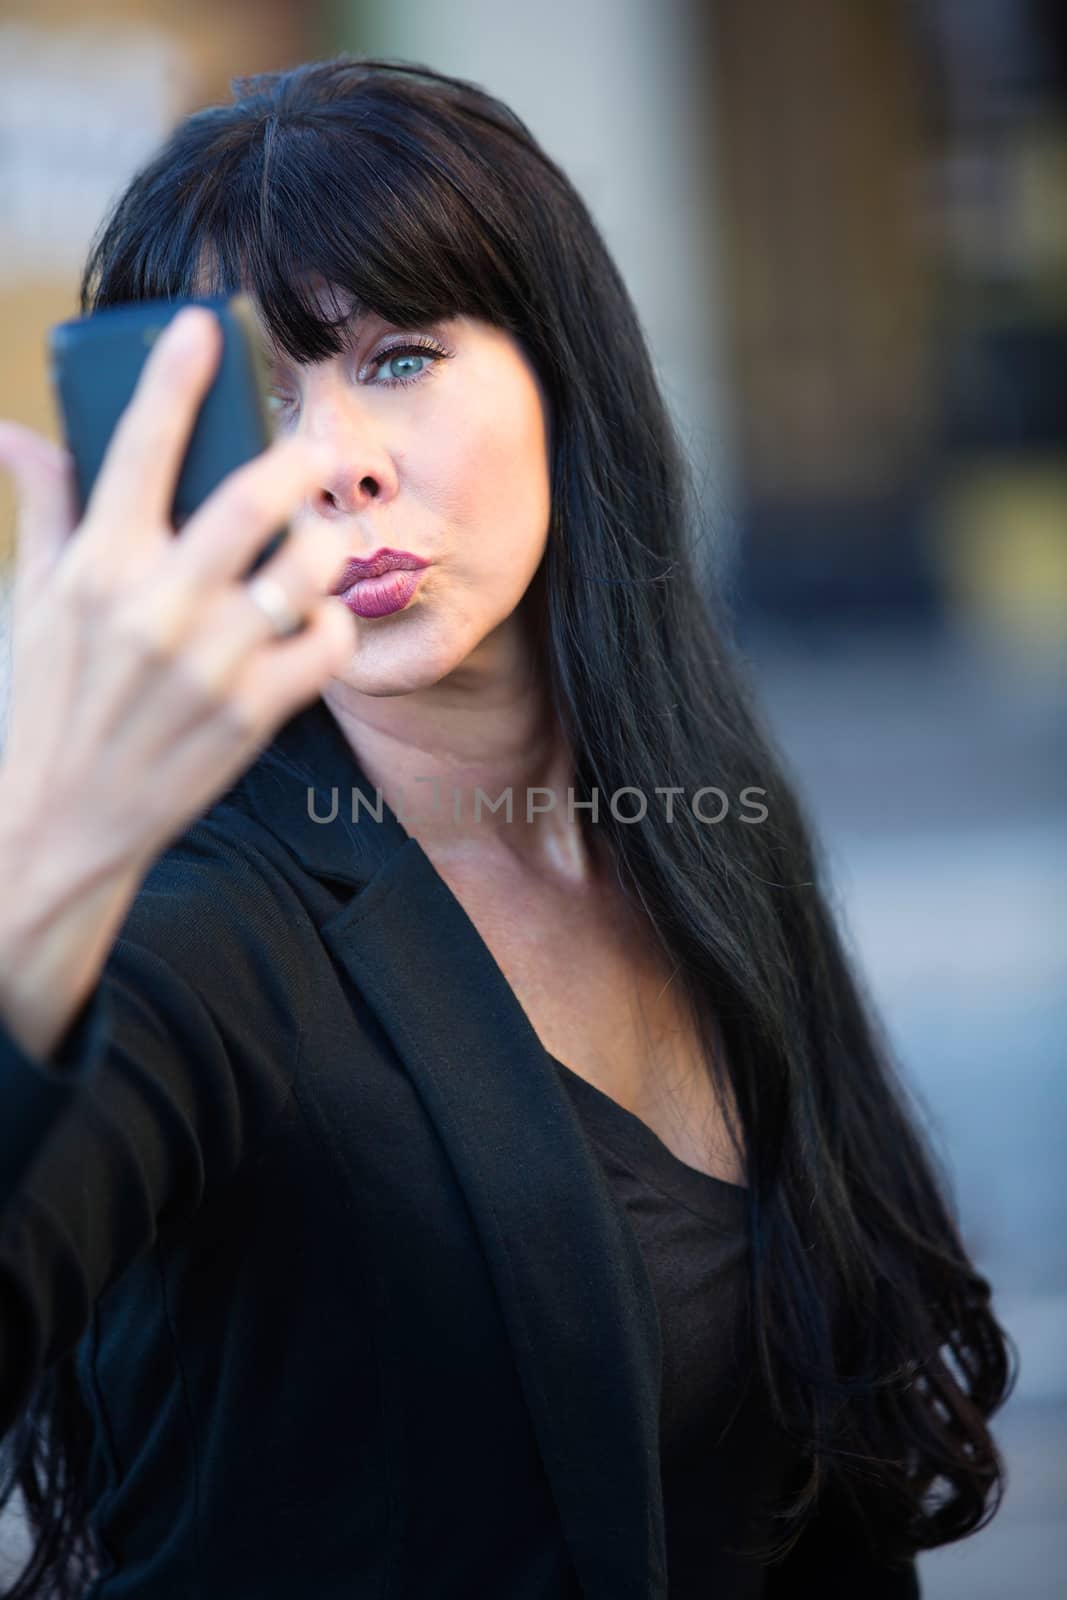 Pretty woman in downtown setting puckers her lips for a selfie